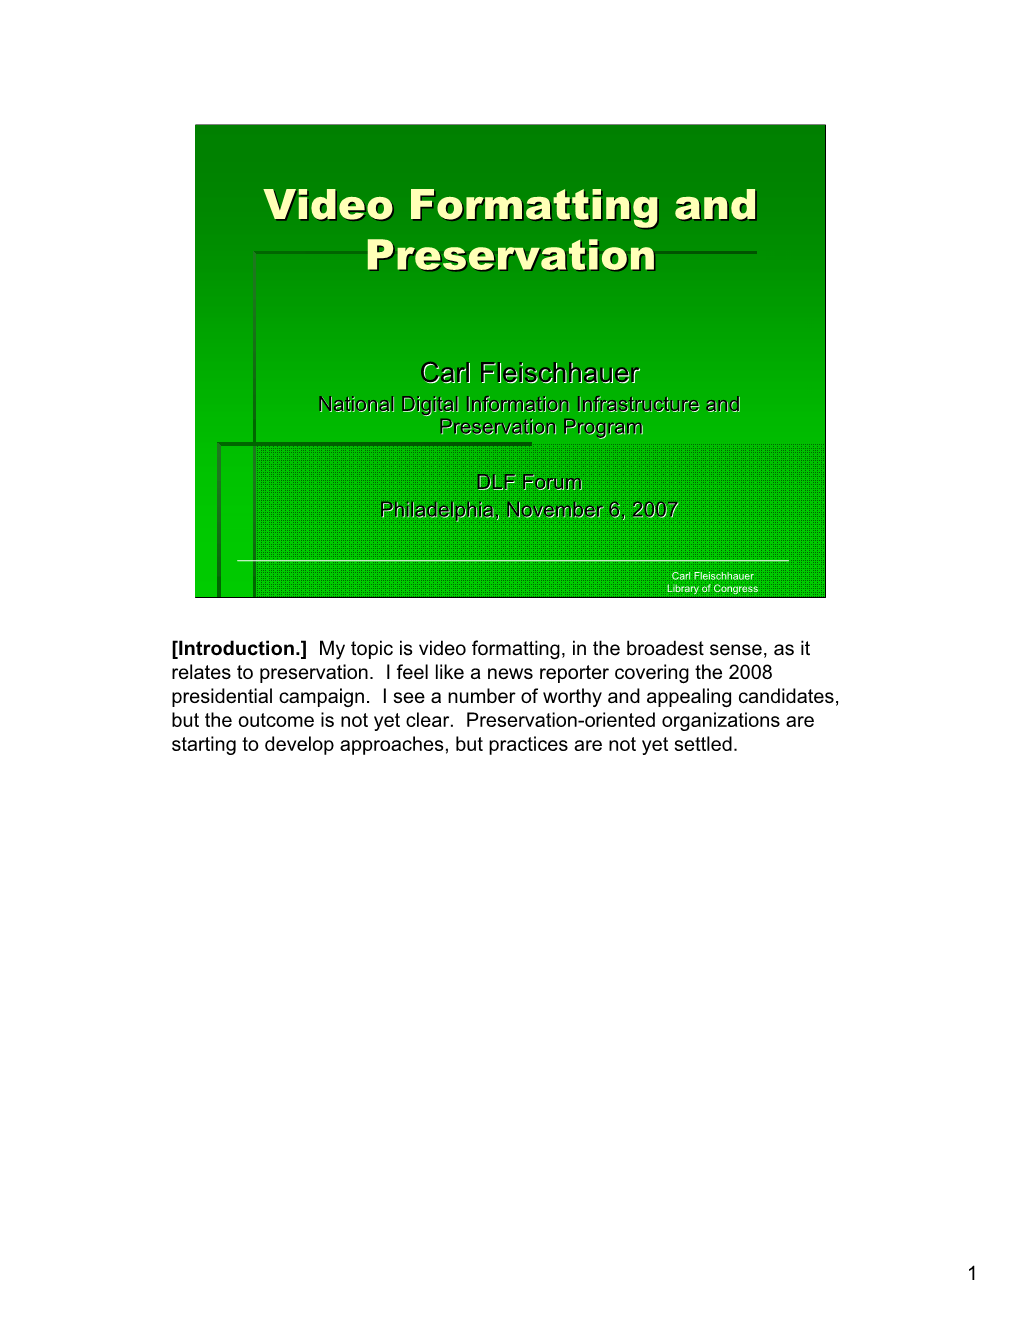 Video Formatting and Preservation